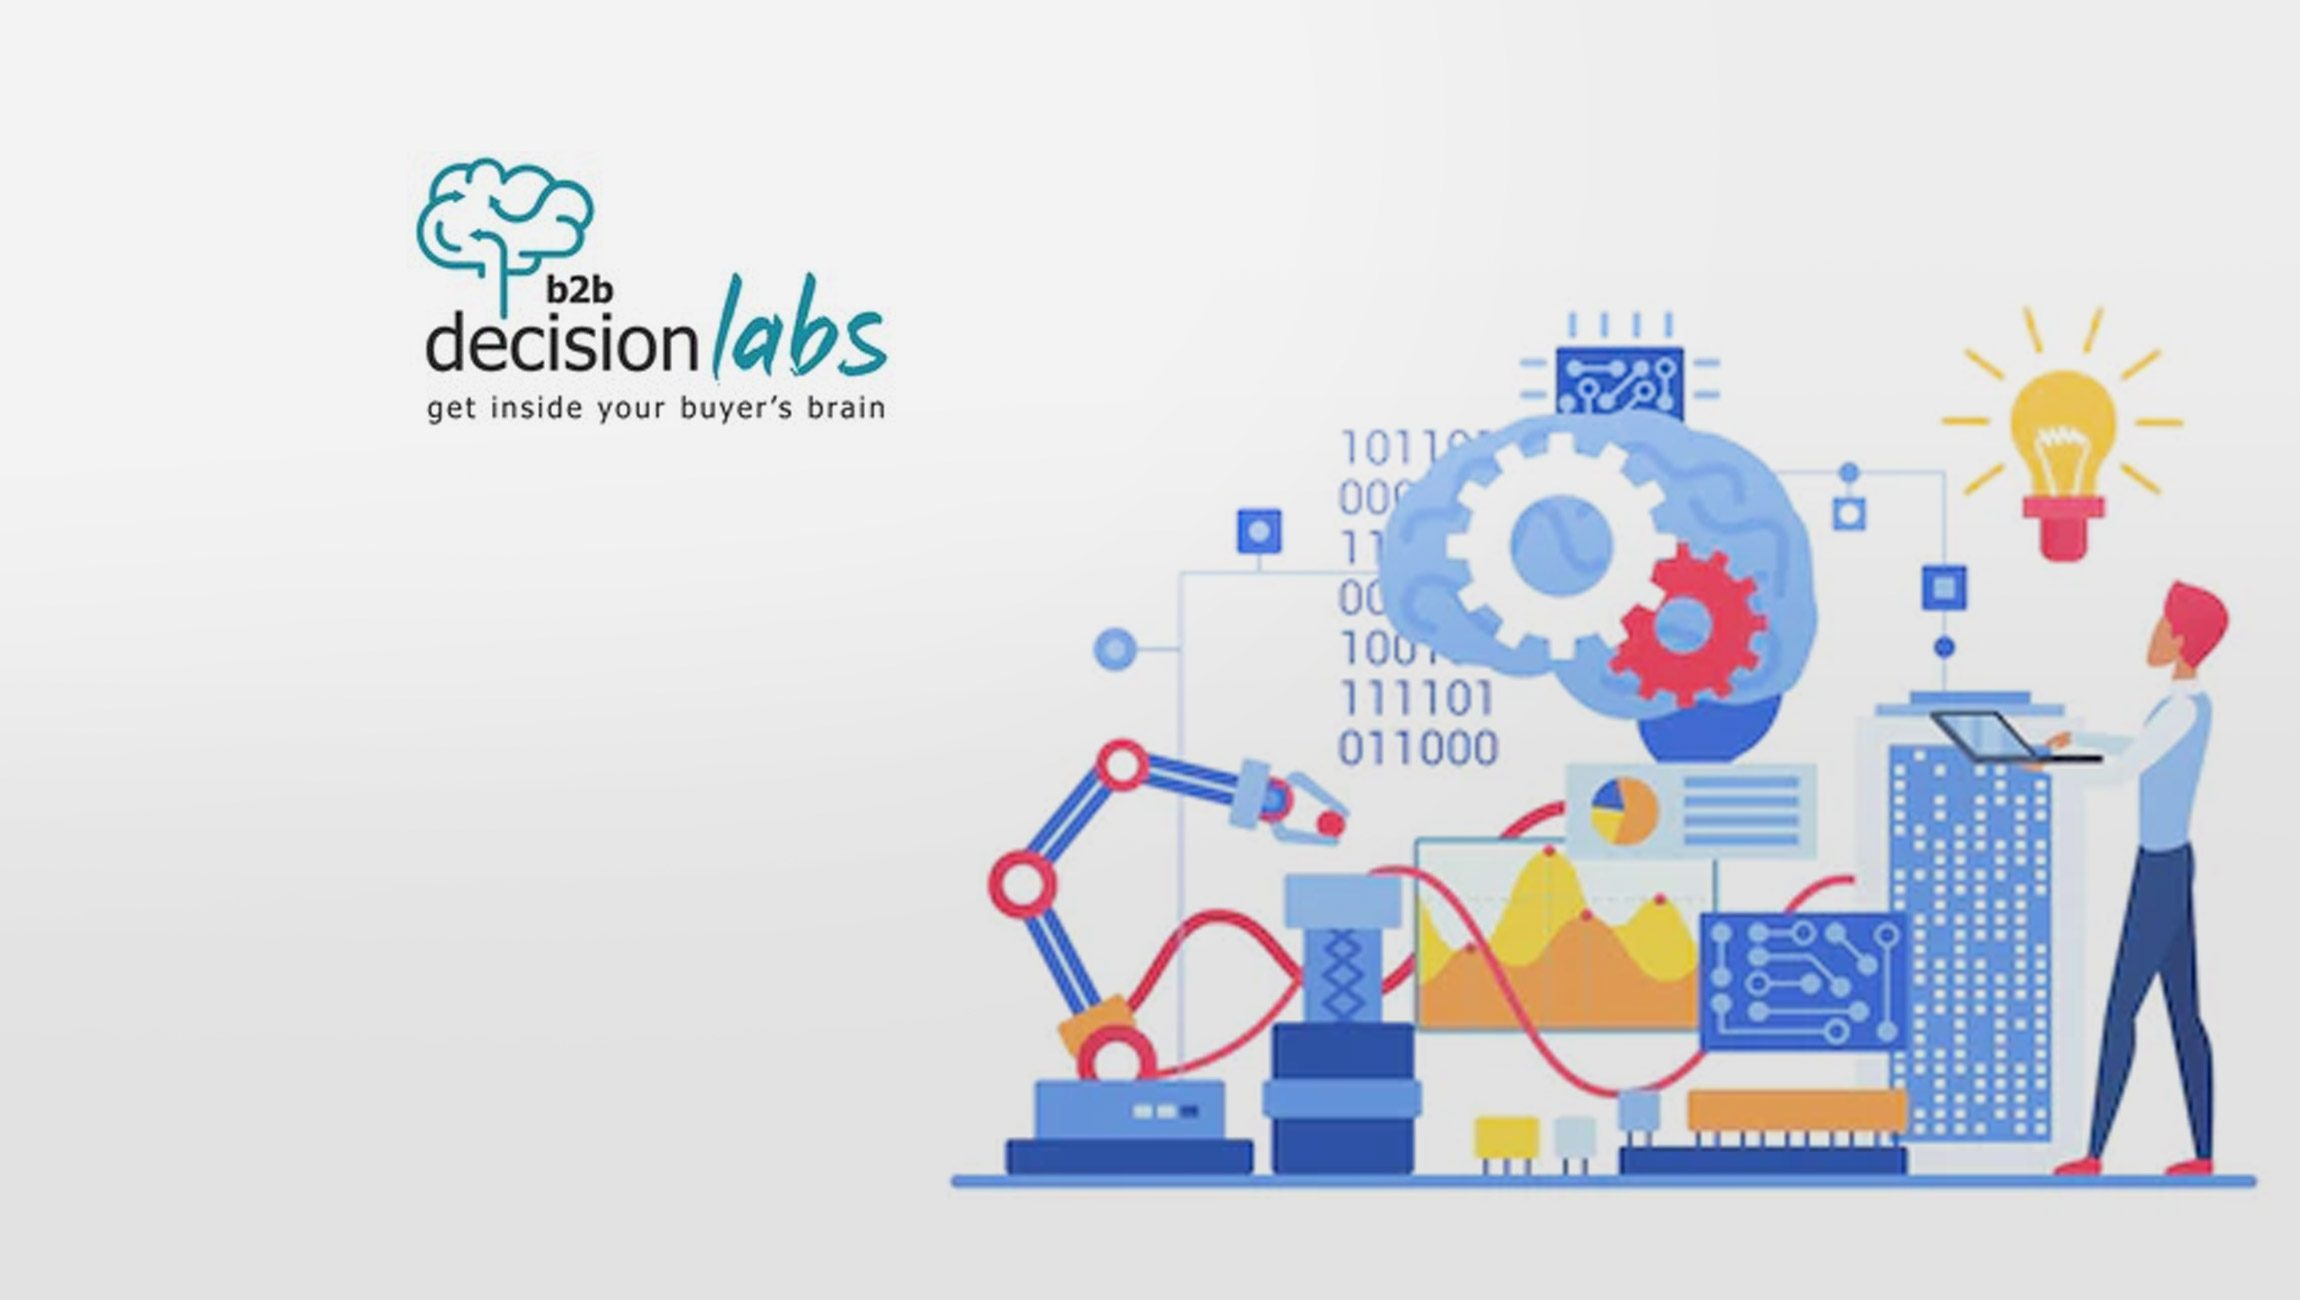 B2B DecisionLabs Adds New Sales Analytics as a Service Practice and Machine Learning Laboratory